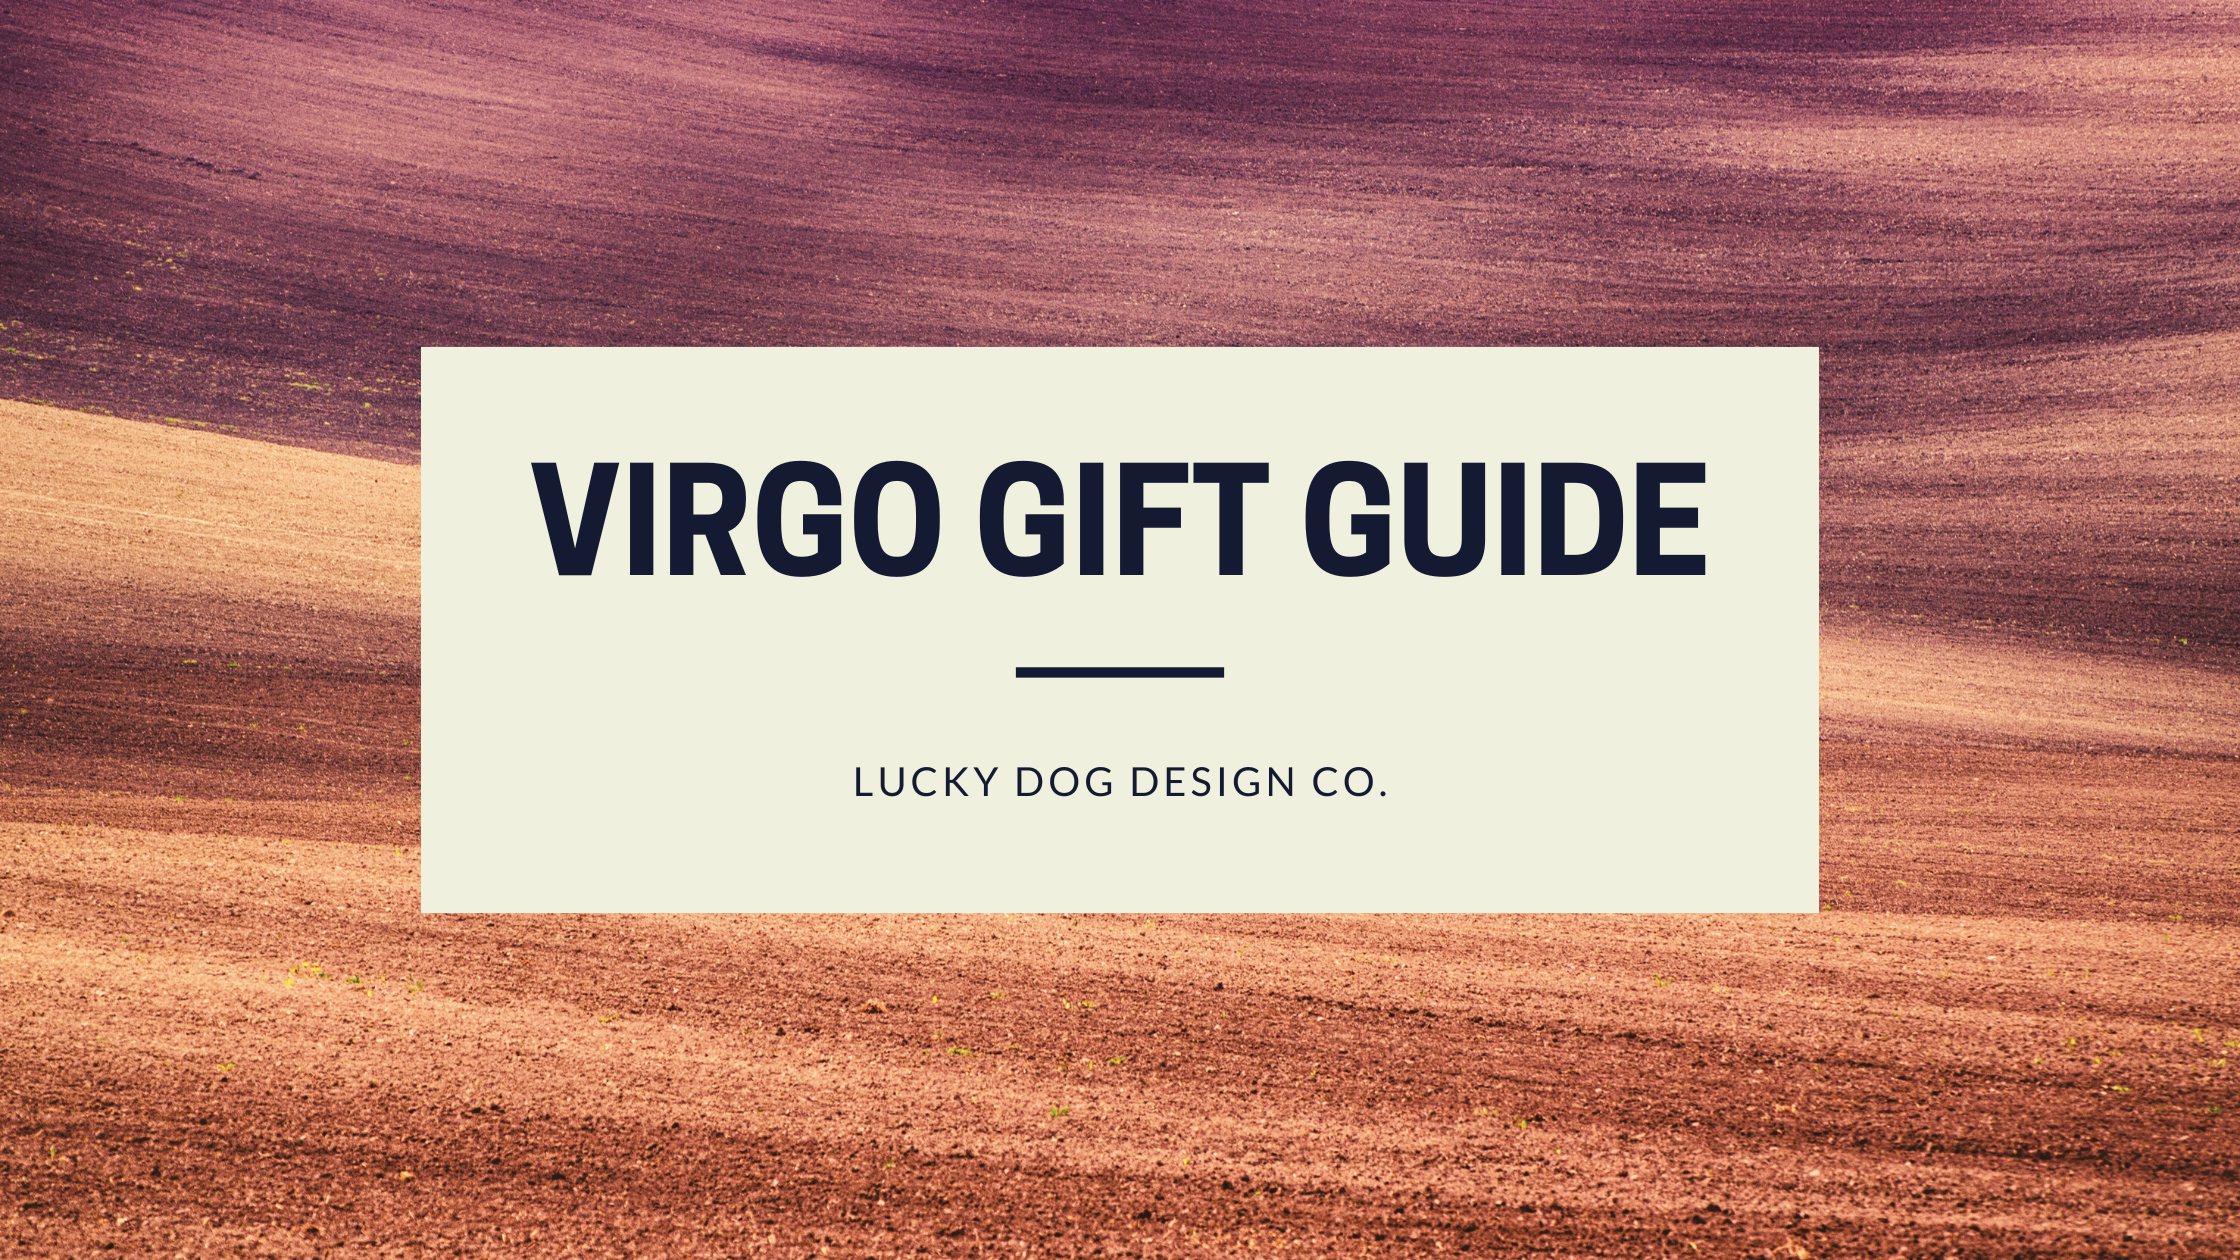 Virgo Gift Guide: 8 Birthday Gifts for the Down-to-Earth, Practical Virgo in Your Life